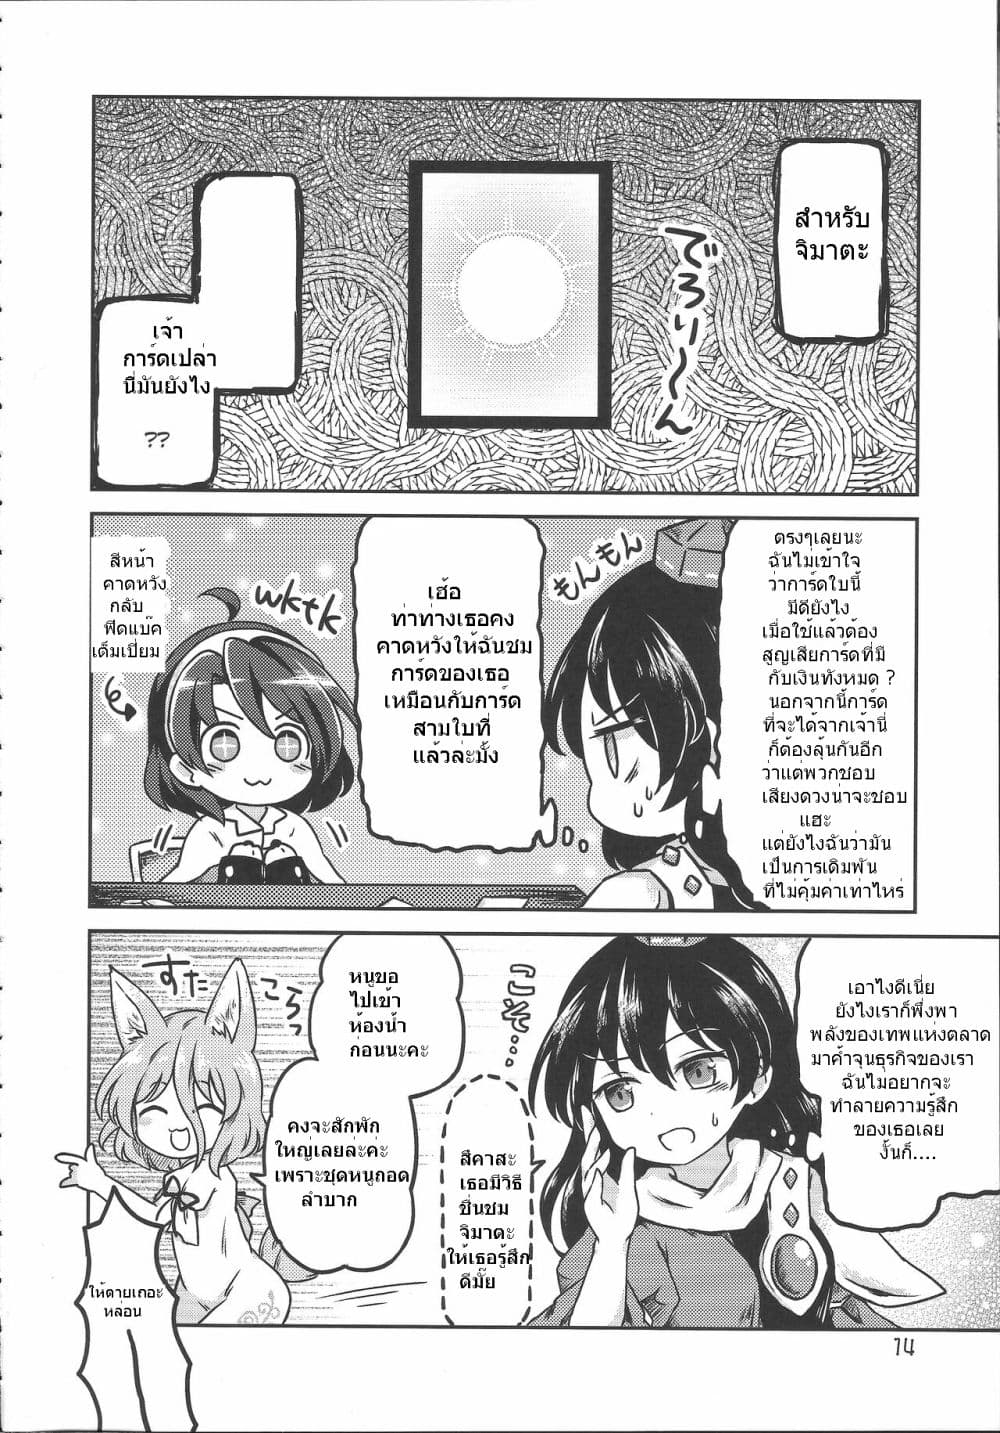 Touhou Project Chima Book By Pote ตอนที่ 1 (13)